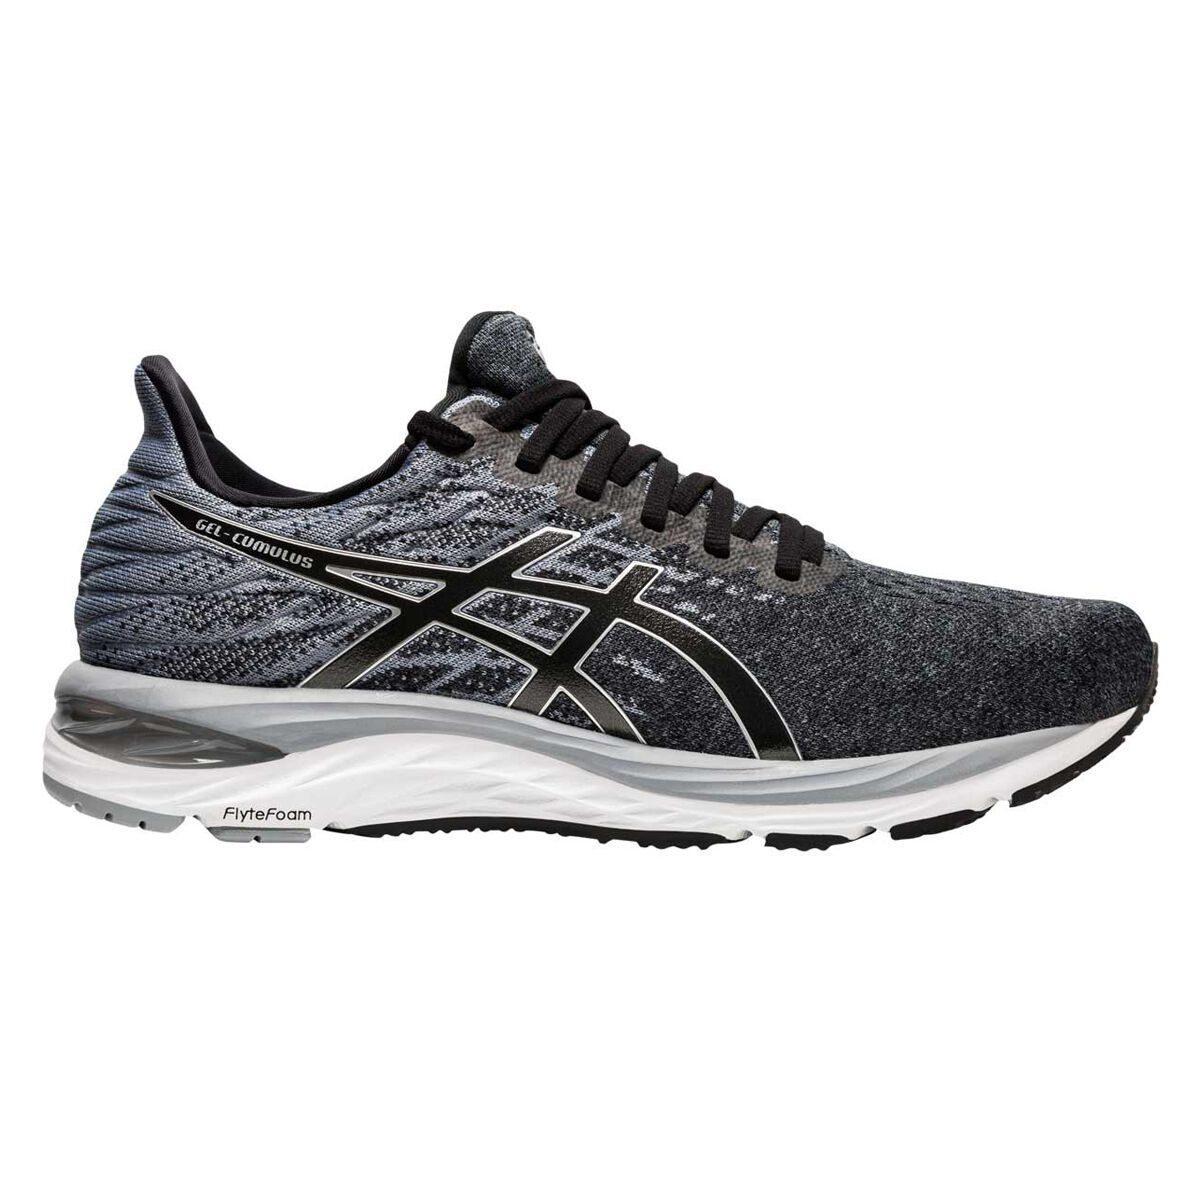 asics casual shoes mens